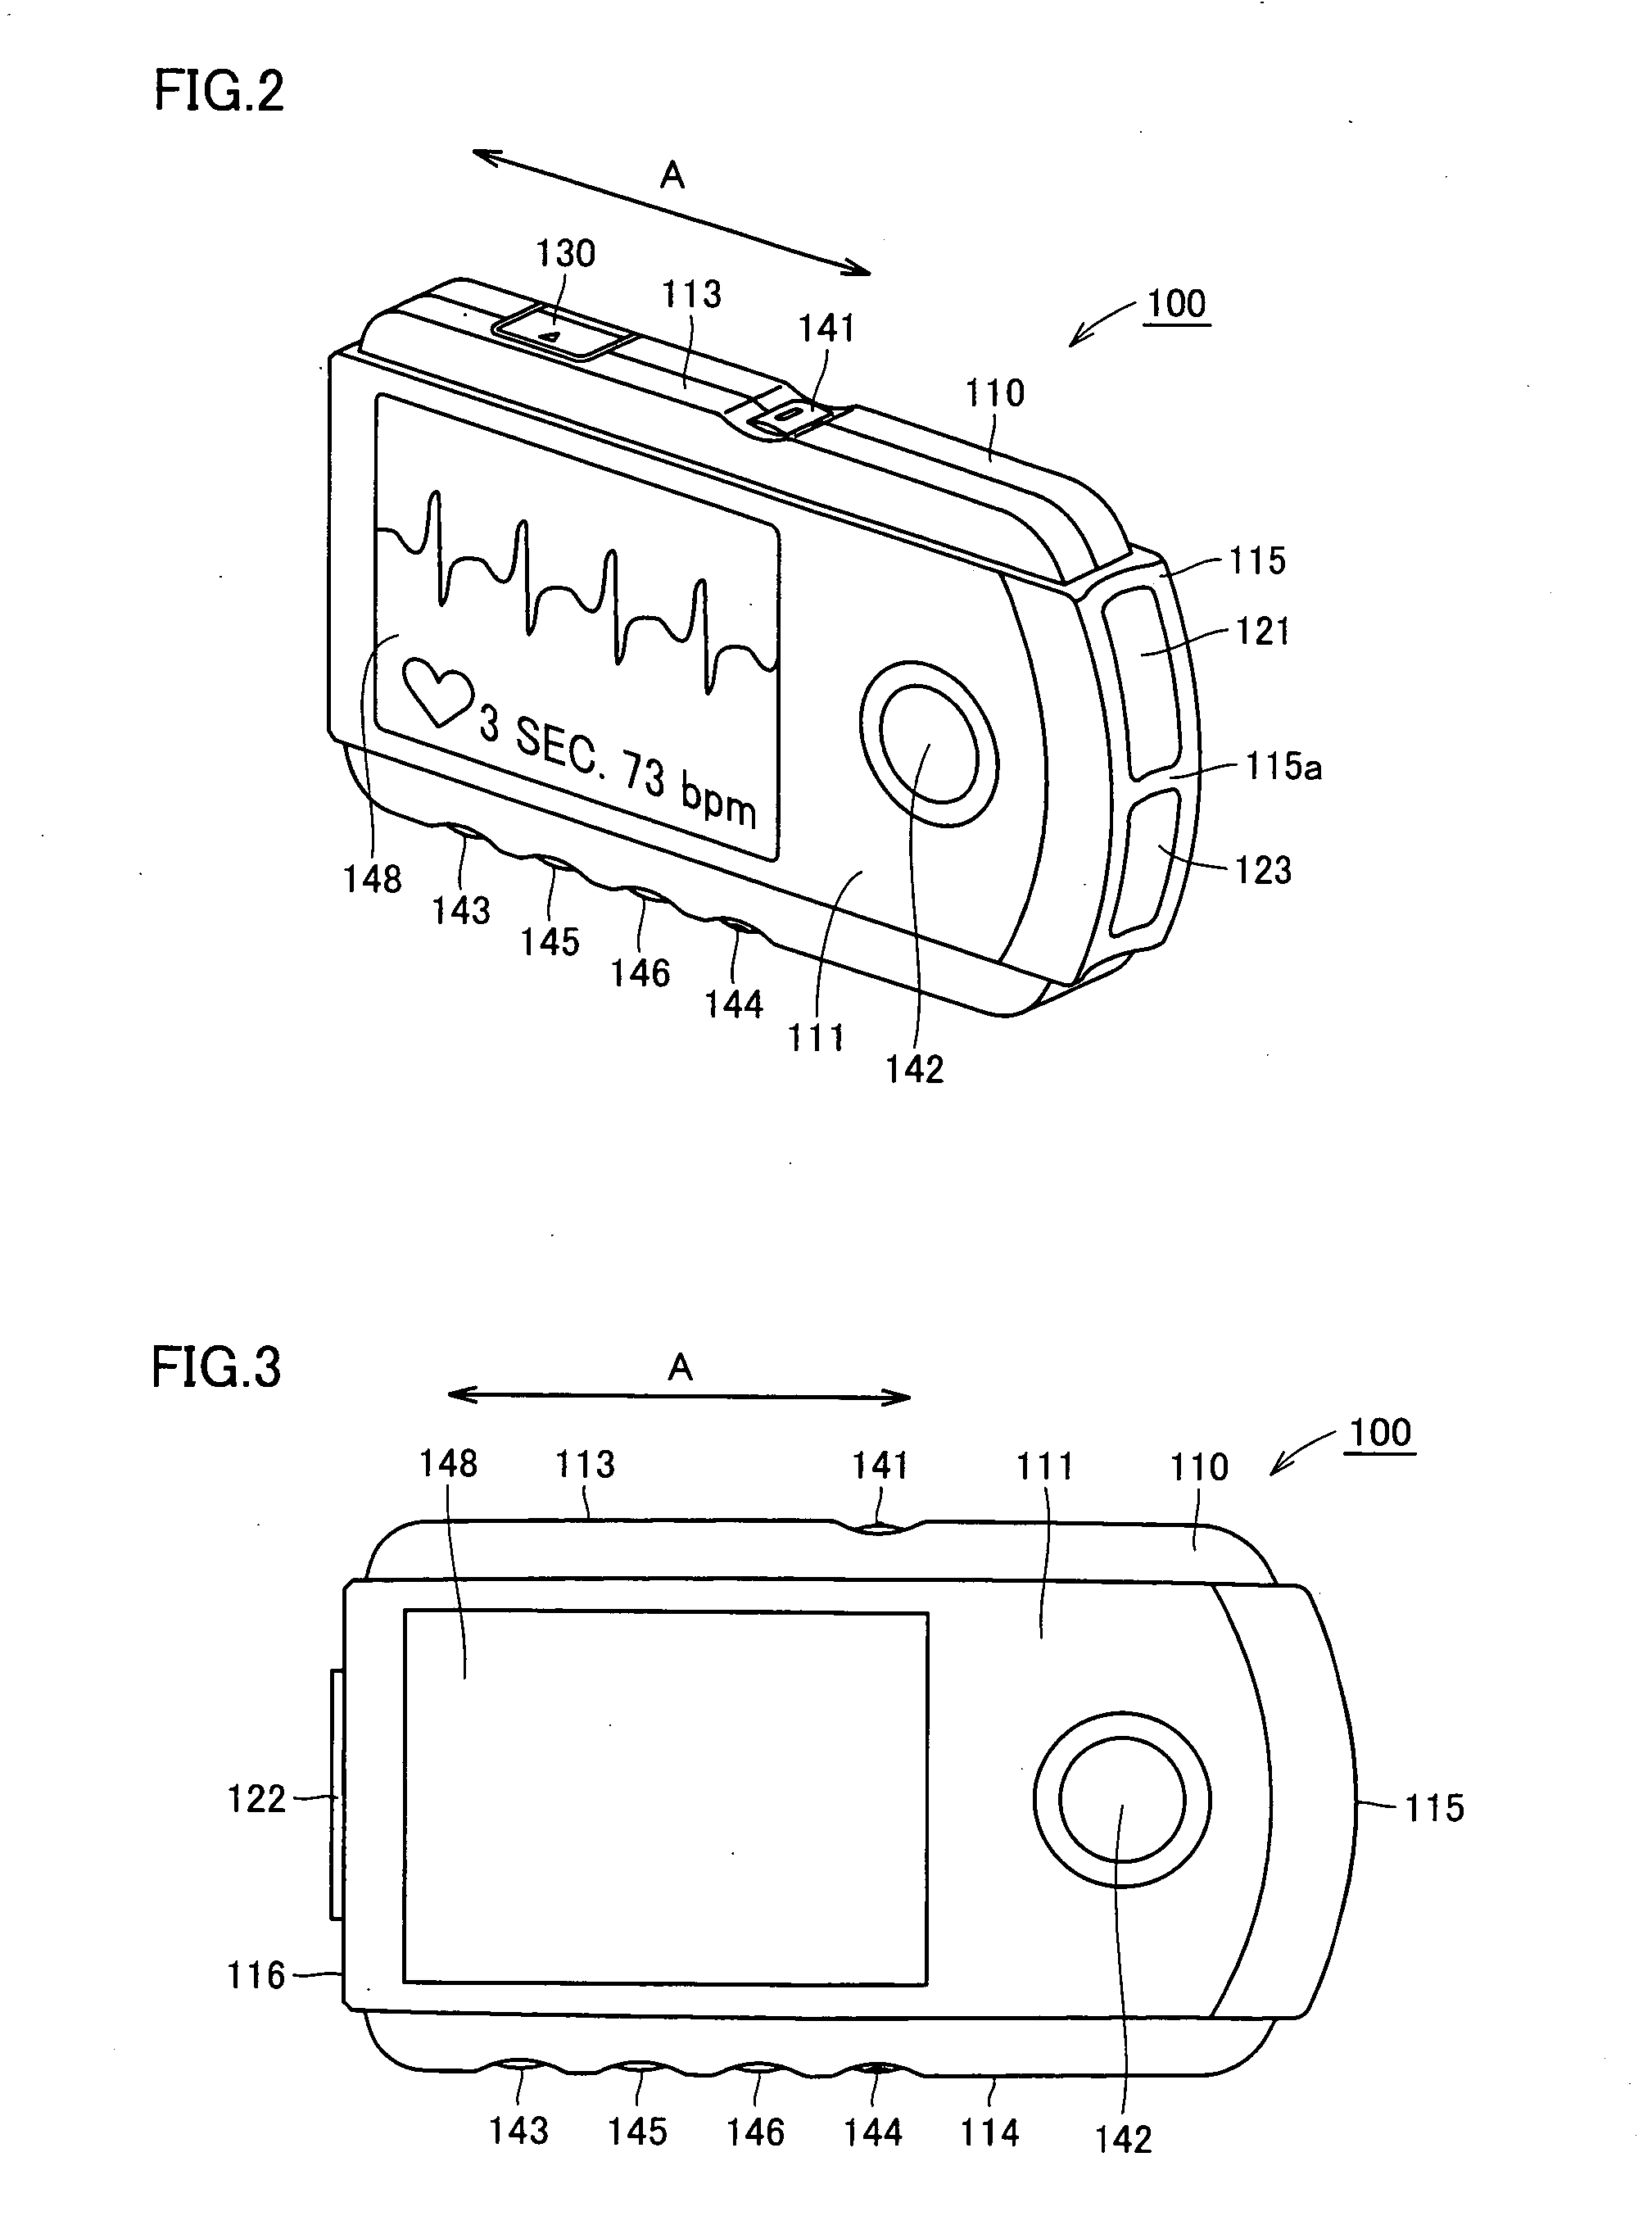 Portable electrocardiograph and processing method